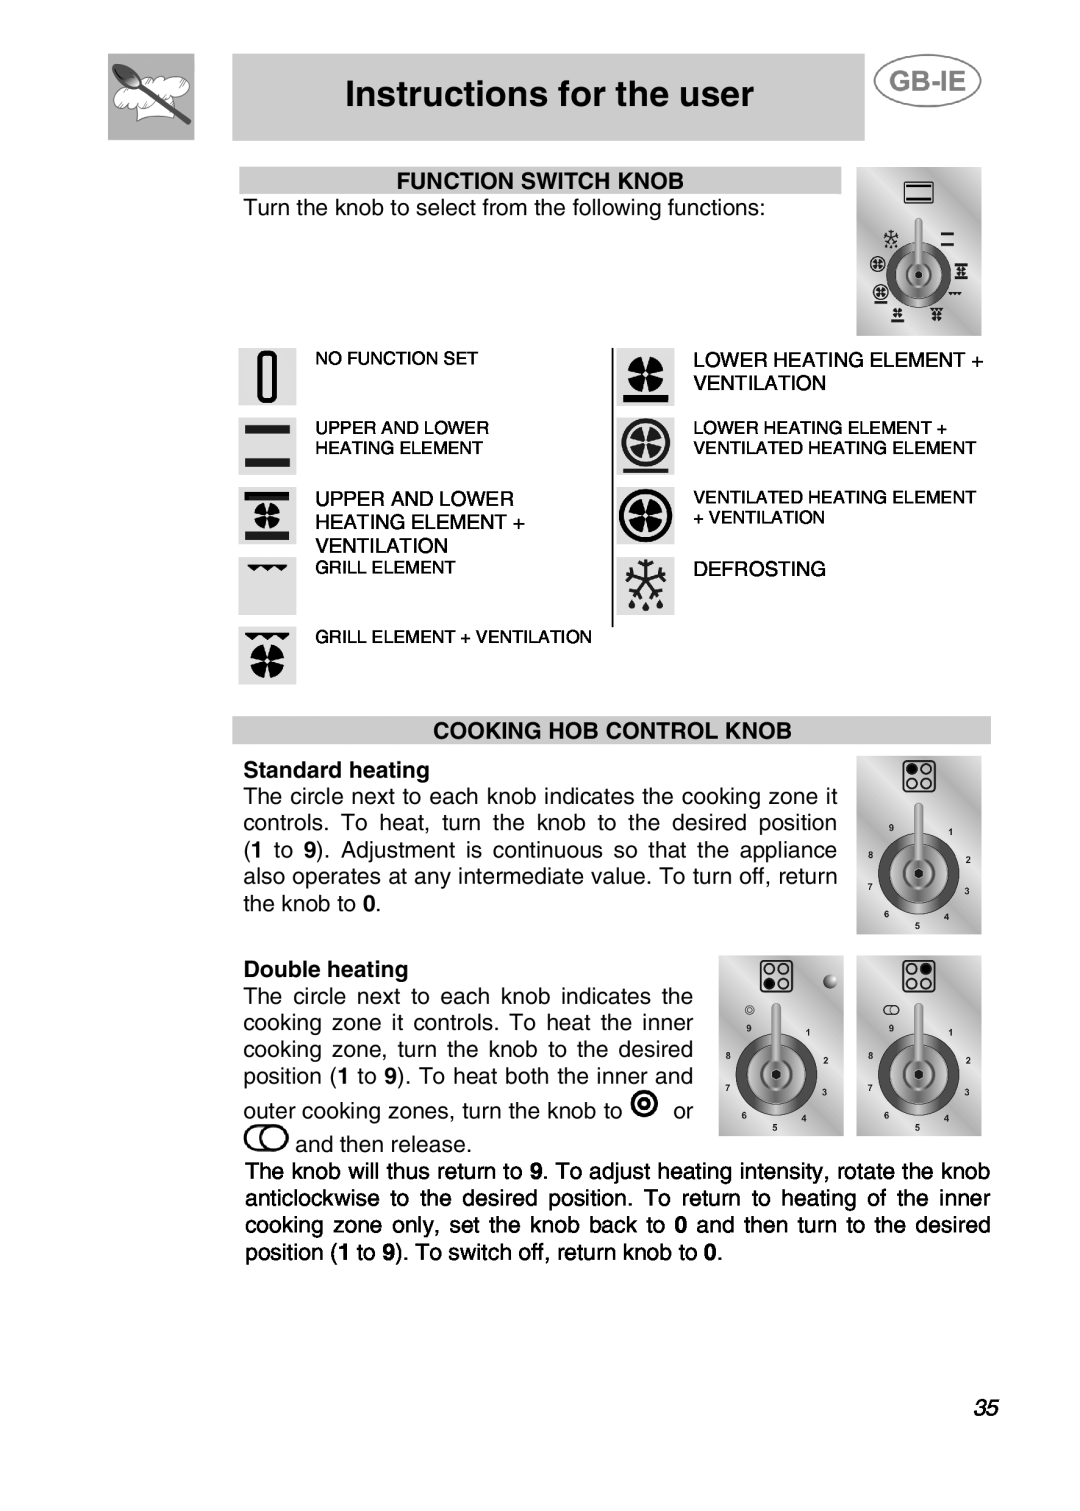 Smeg A41C-5 Instructions for the user, Function Switch Knob, COOKING HOB CONTROL KNOB Standard heating, Double heating 